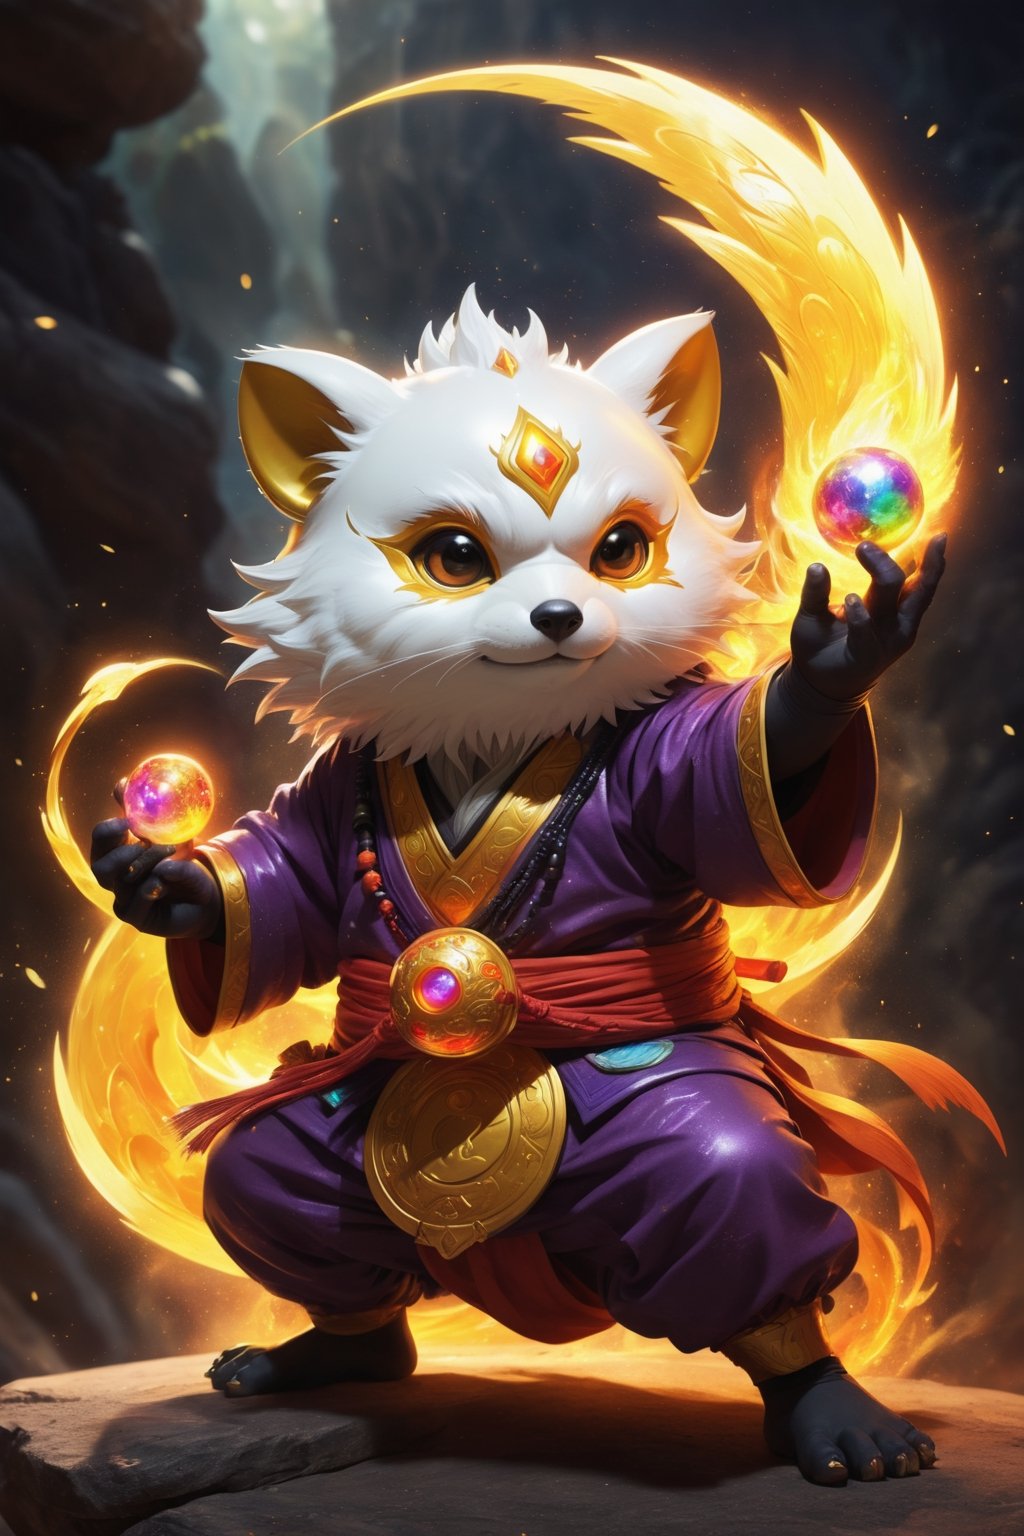 1Ninja tanuki,fighting,7 color Ninja outfit,7 color ancient alchemy God,holding cosmic ball,chanting,7 color shining ancient words everywhere,glowing mantra everywhere,luminous engraving everywhere,seal,strong style,sun king,sun halo,solo,special long white beard,long white eyebrows,gather lightning elixir in the palm of hand,king of glory,focused on  elixir,aim at pill,colorful skin,surrounded by flames,golden butterfly wings,emitting golden light,wearing golden bib short with no shoulder strap on left shoulder,no humans,flame,beam,fire alchemy furnace,thunder pill,crystal cave,crystal background,diamond,gem